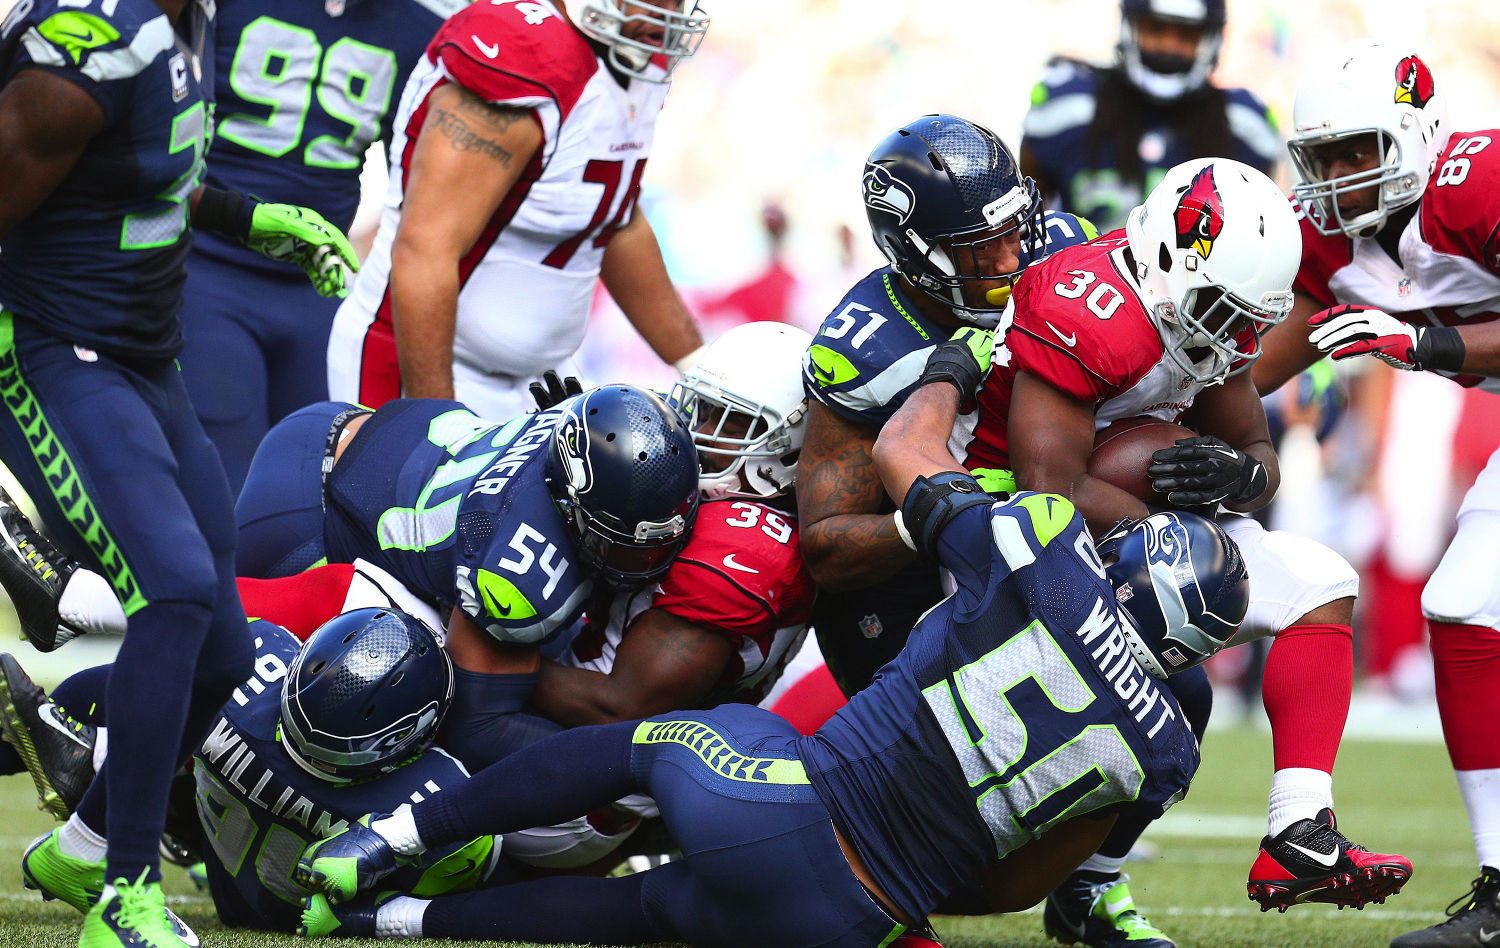 Seahawks+team+up+to+bring+down+Cardinal+running+back+Stepfan+Taylor+at+CenturyLink+Field+in+Seattle%2C+Sunday%2C+Nov.+23%2C+2014.